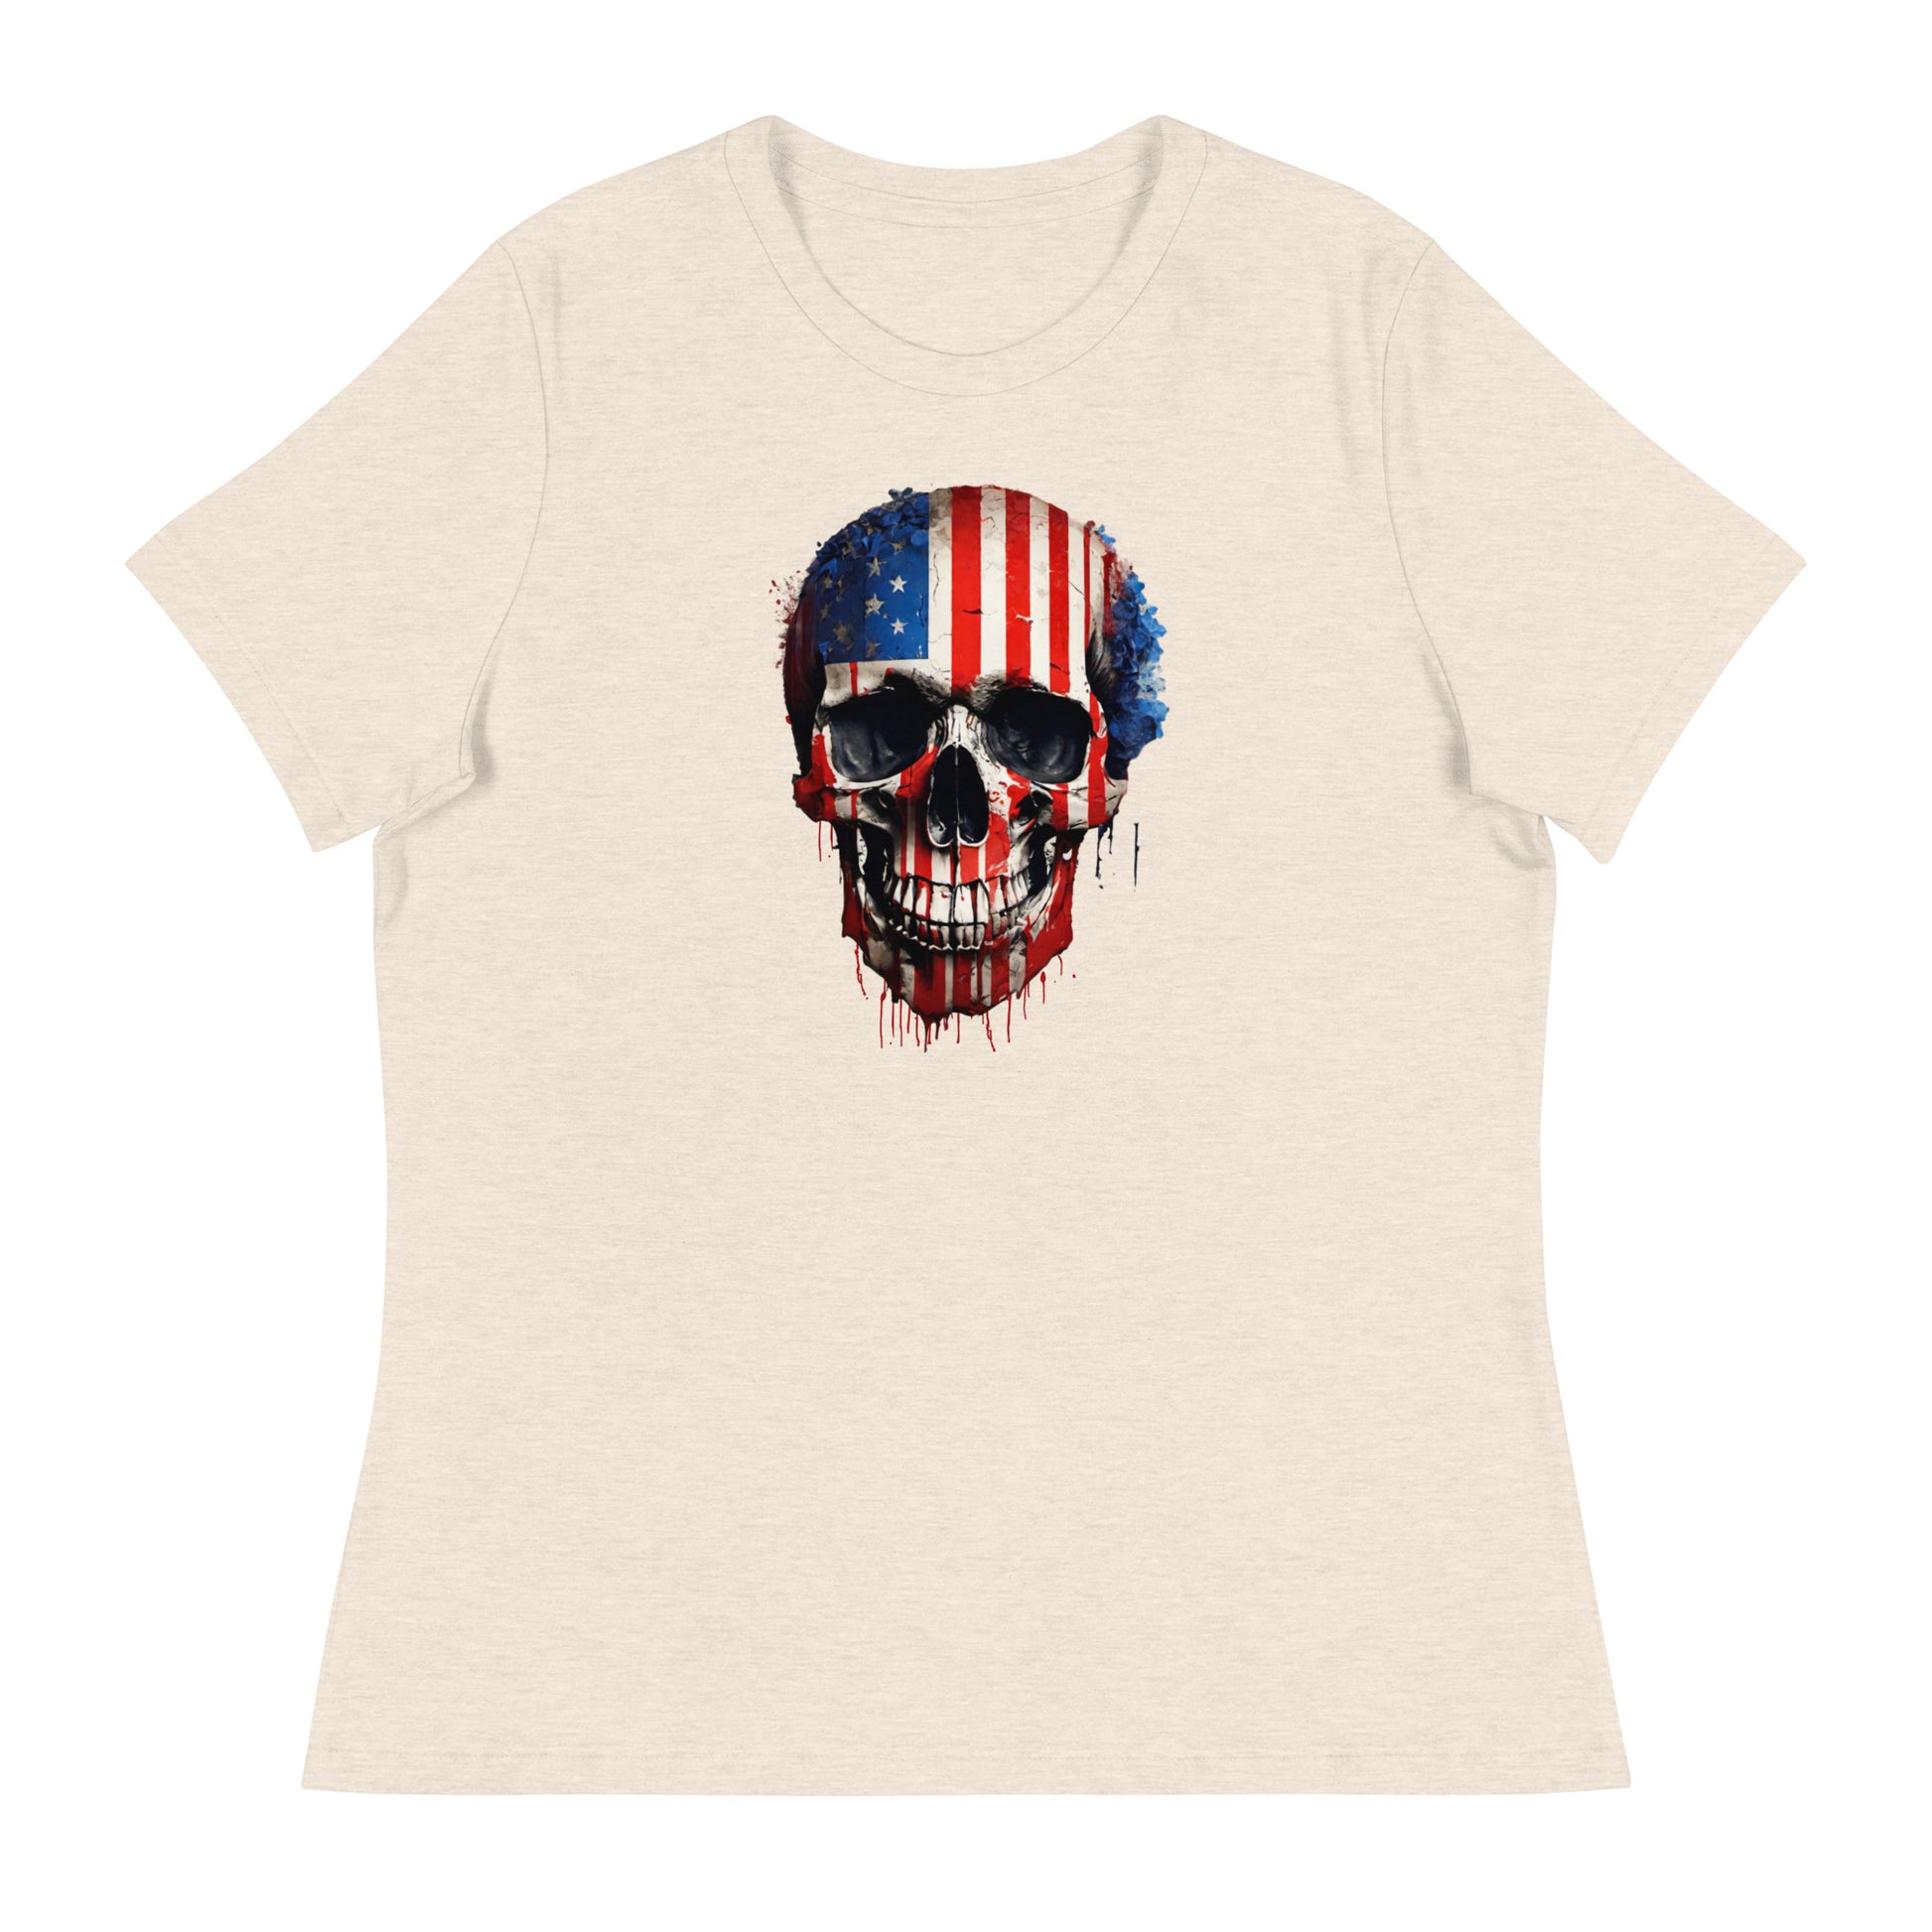 Red, White, & Blue Skull Women's T-Shirt Heather Prism Natural